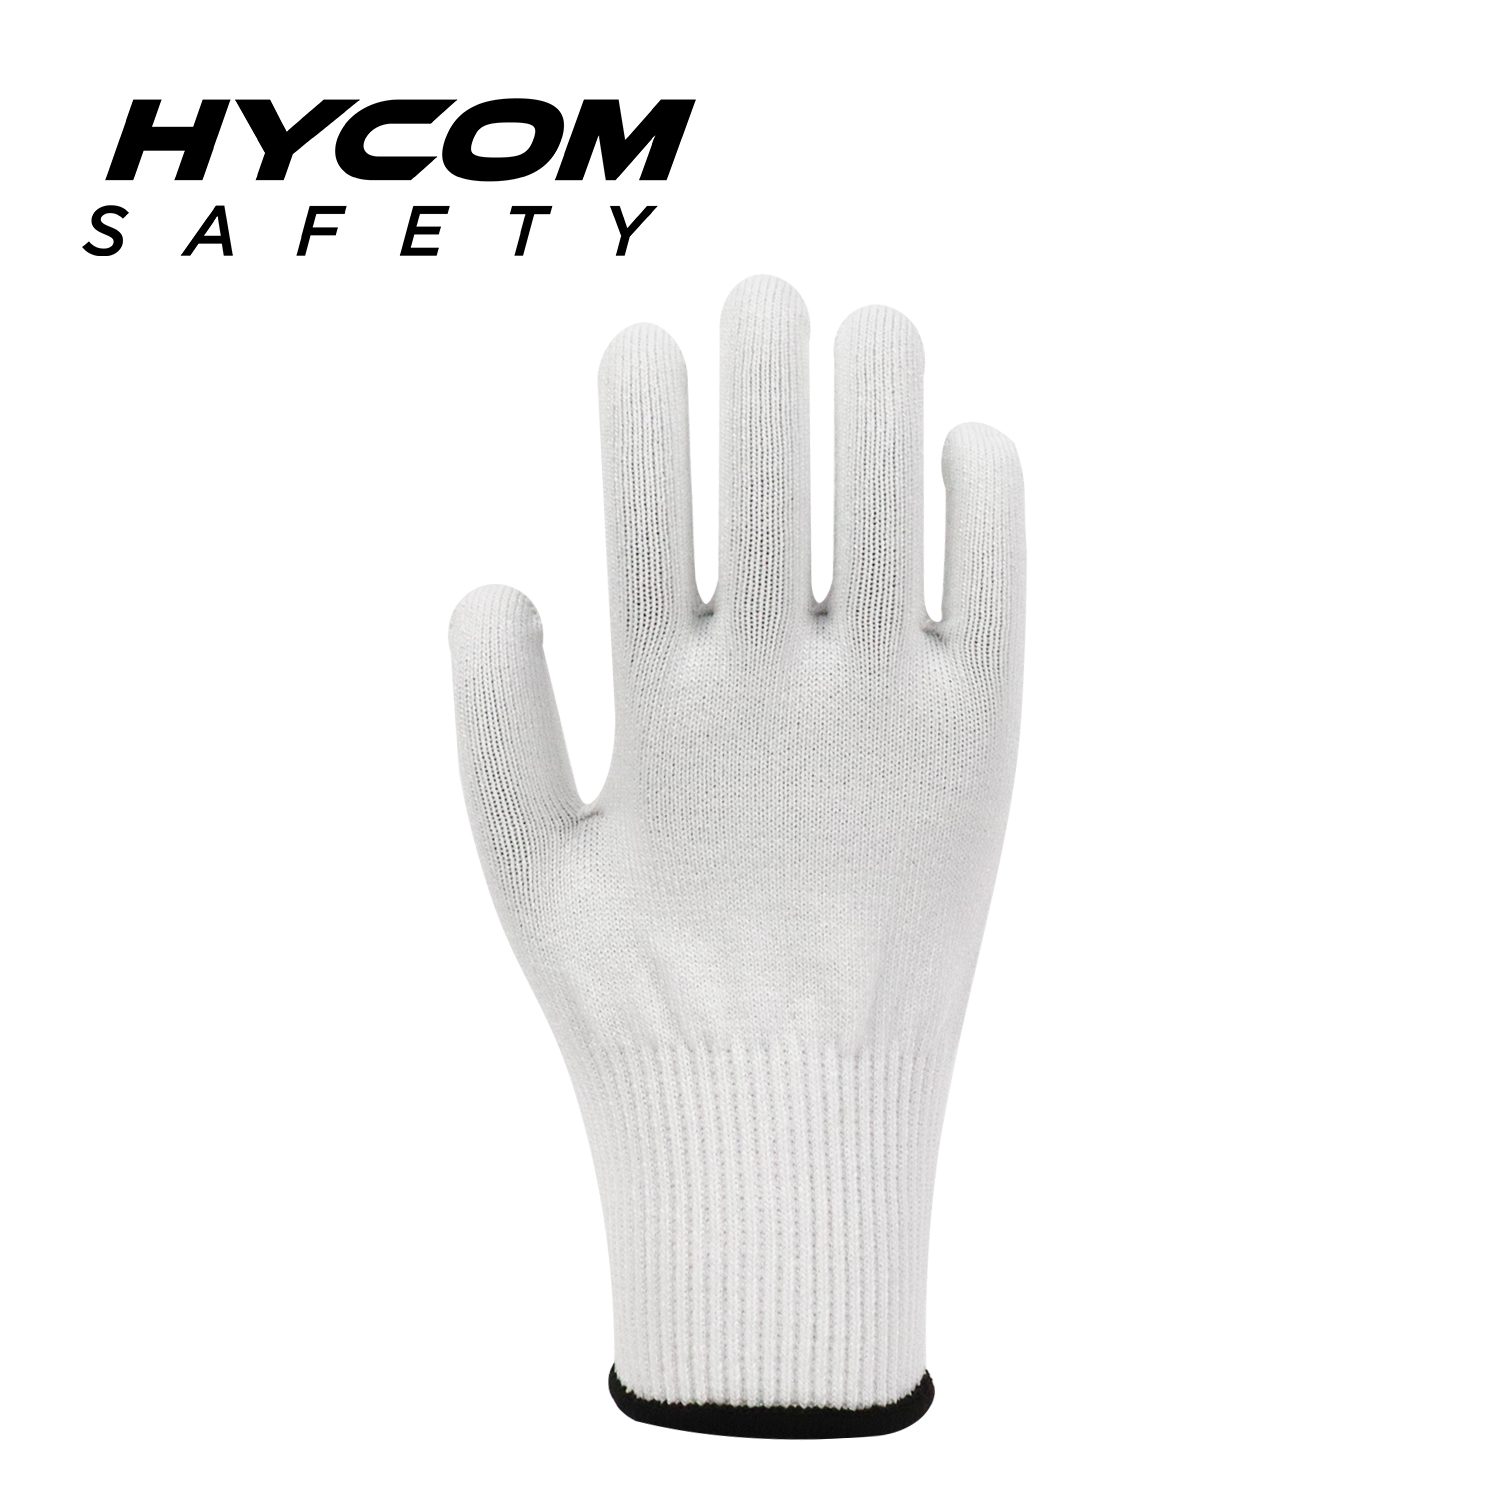 HYCOM 13G Level 5 Cut Resistant Glove FDA Food Contact Directly PPE gloves